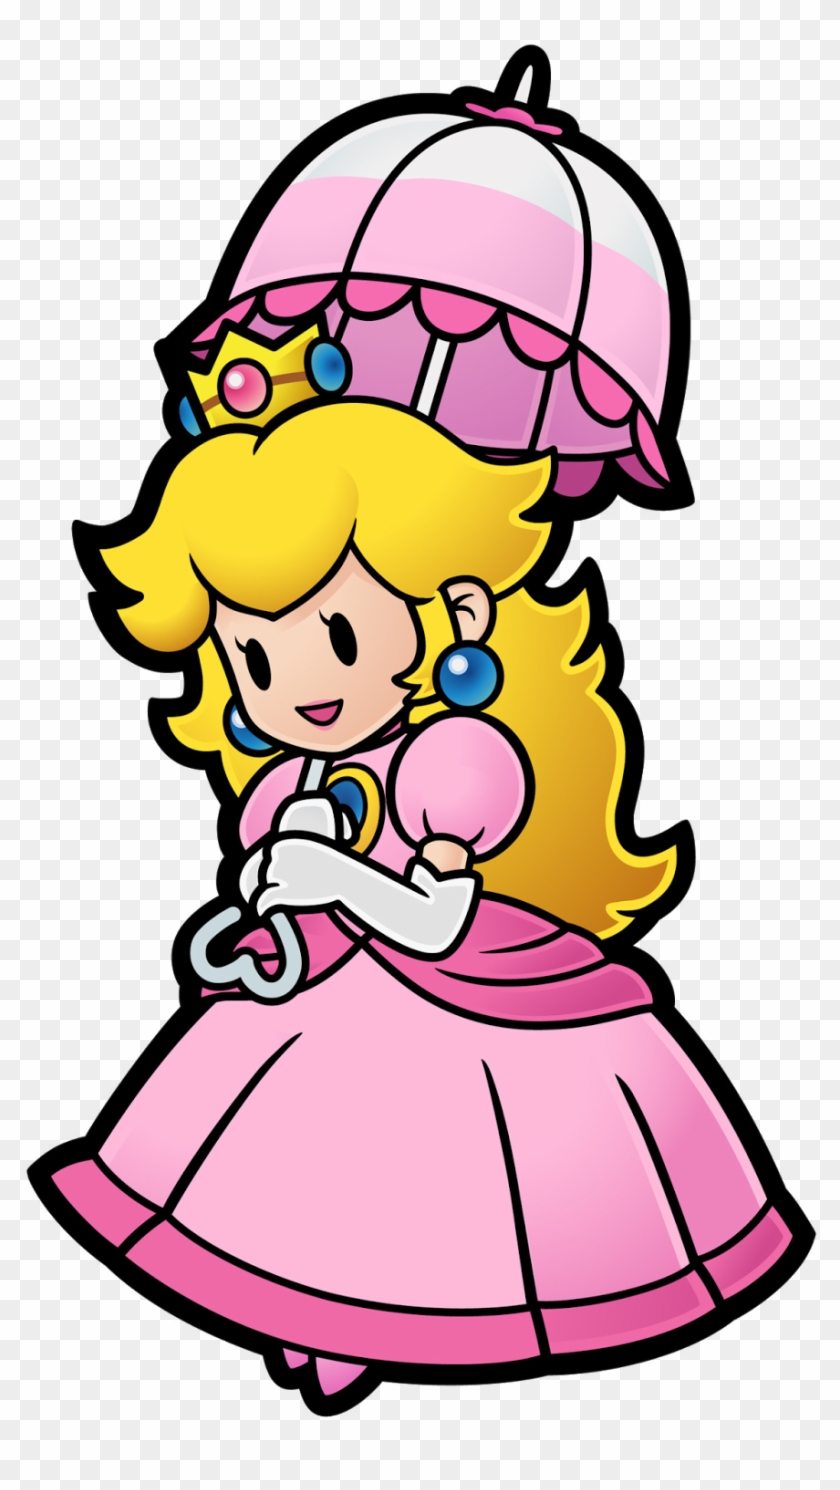 But On The Flipside Of Things We Have Abilities Like - Paper Mario Princess Peach #1383897